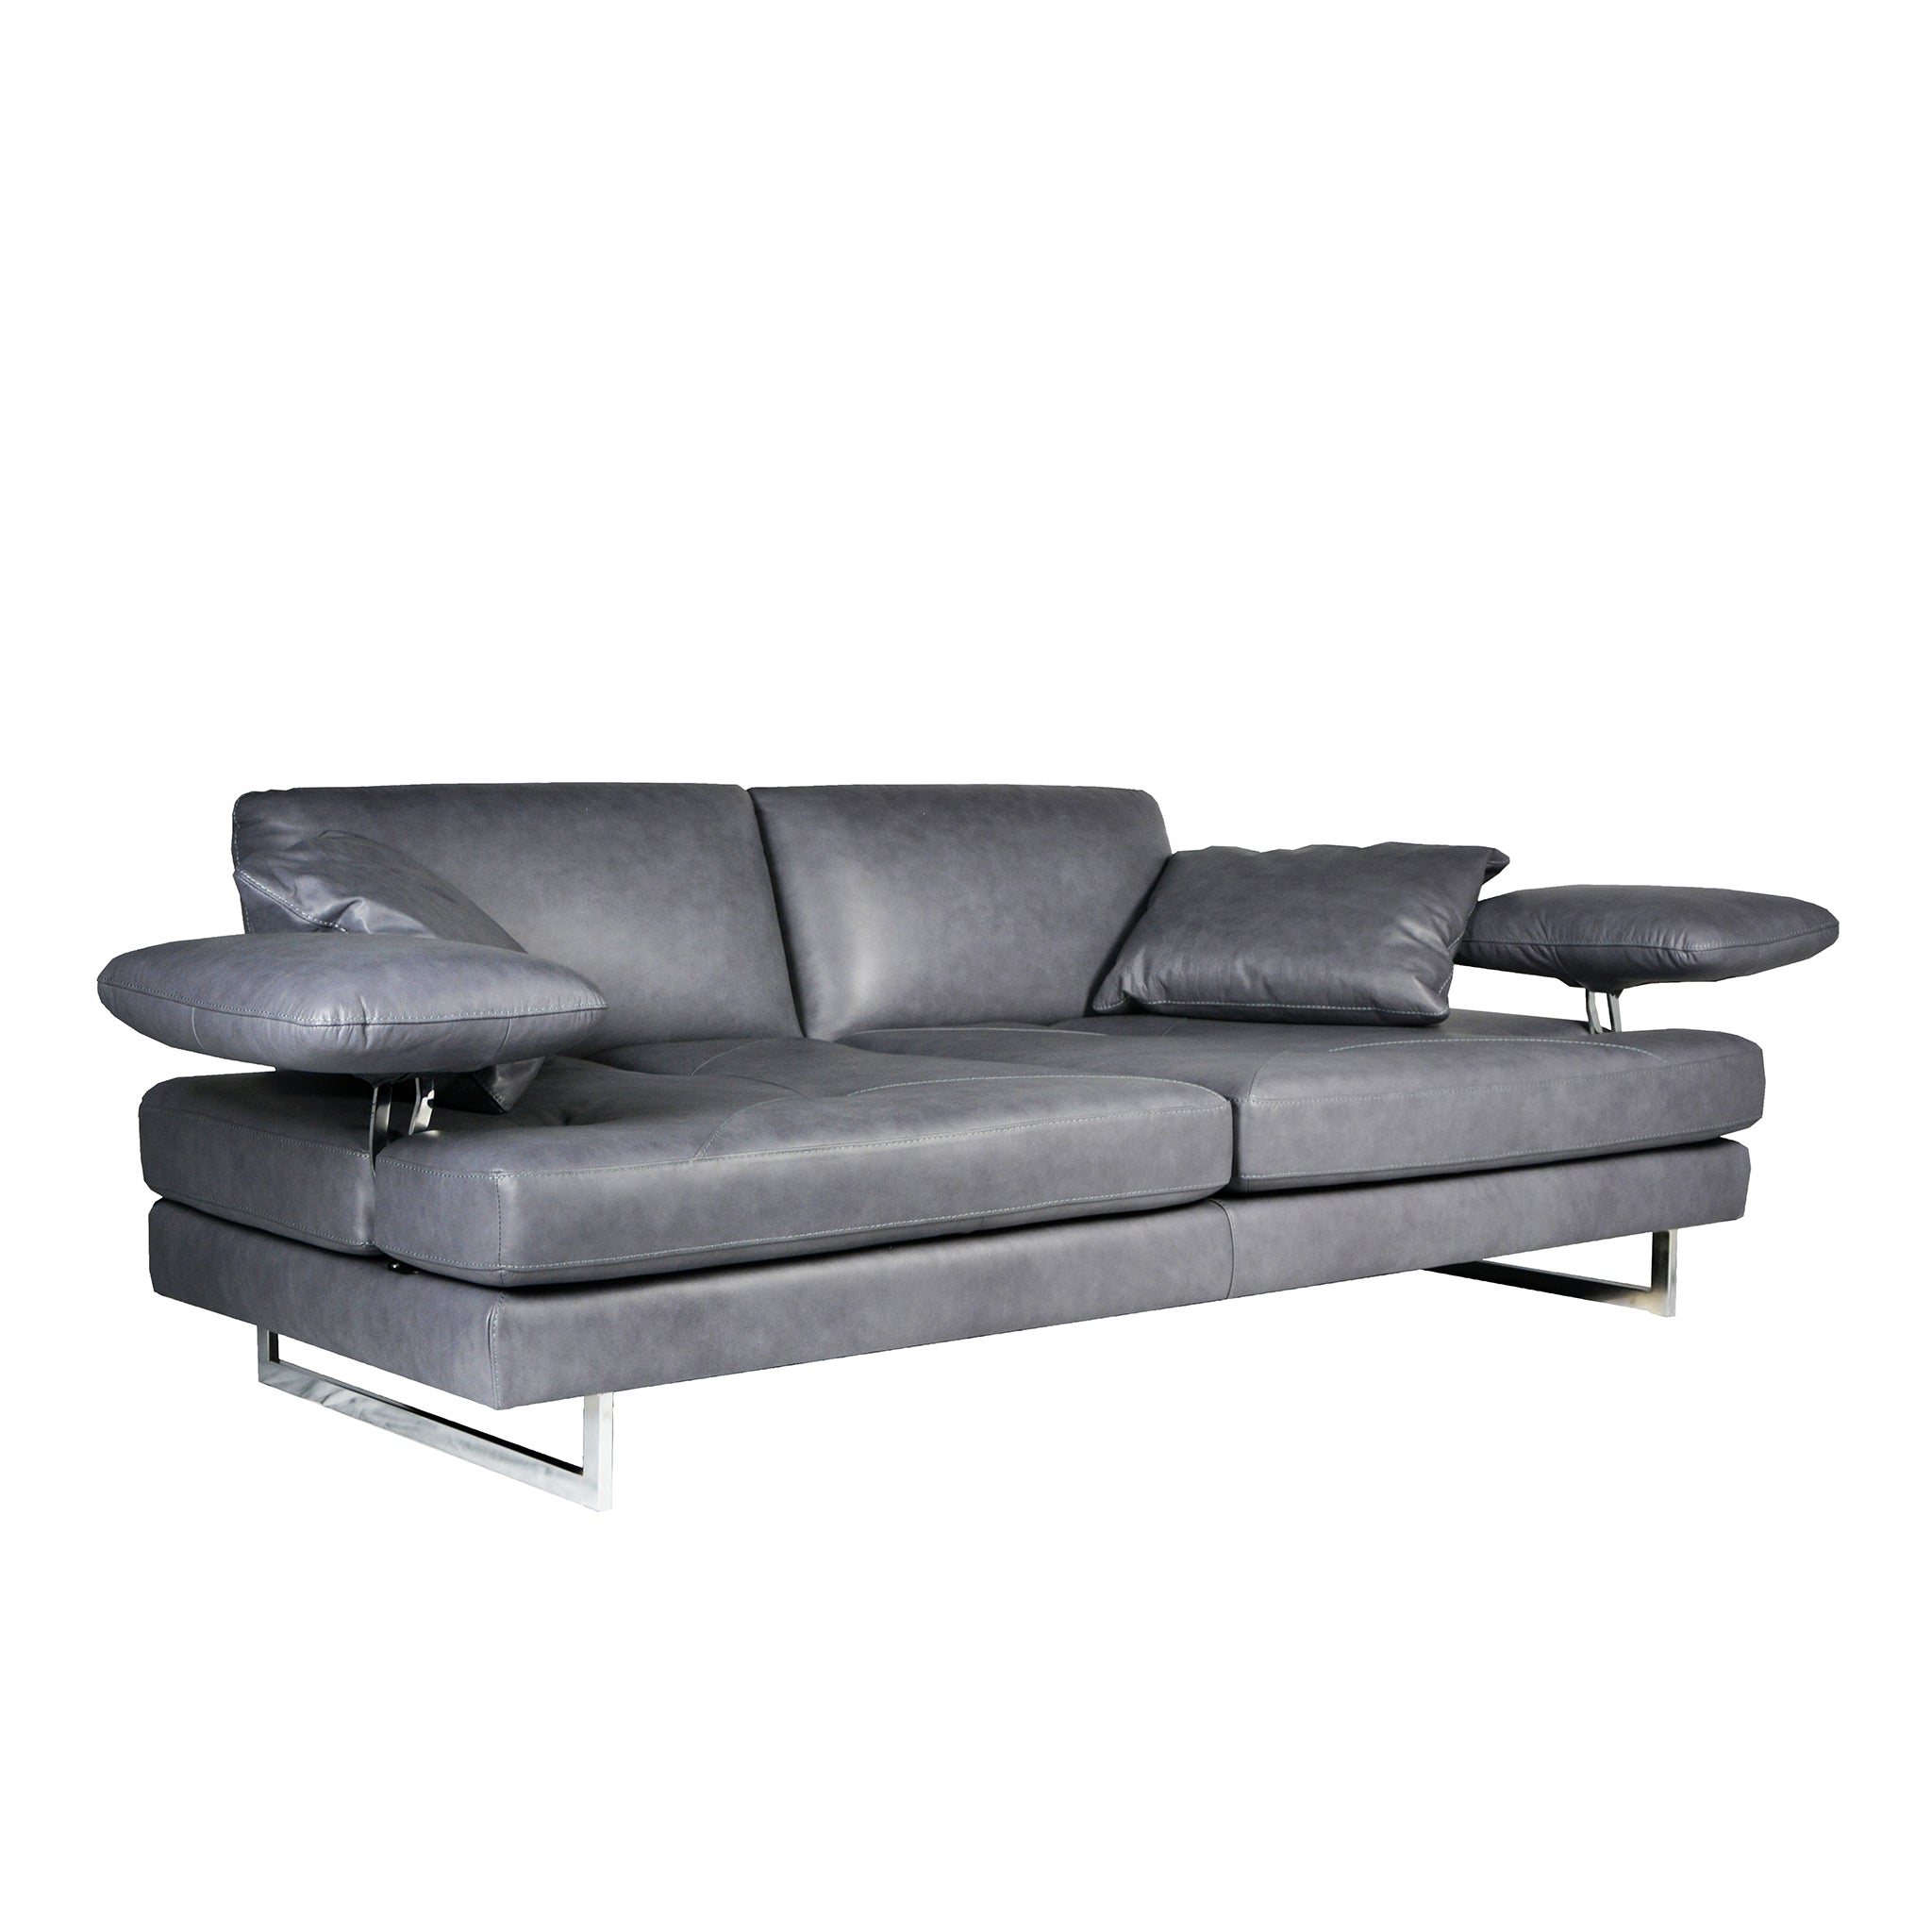 DAY NIGHT 3 Seater Sofa in Leather by Castilla